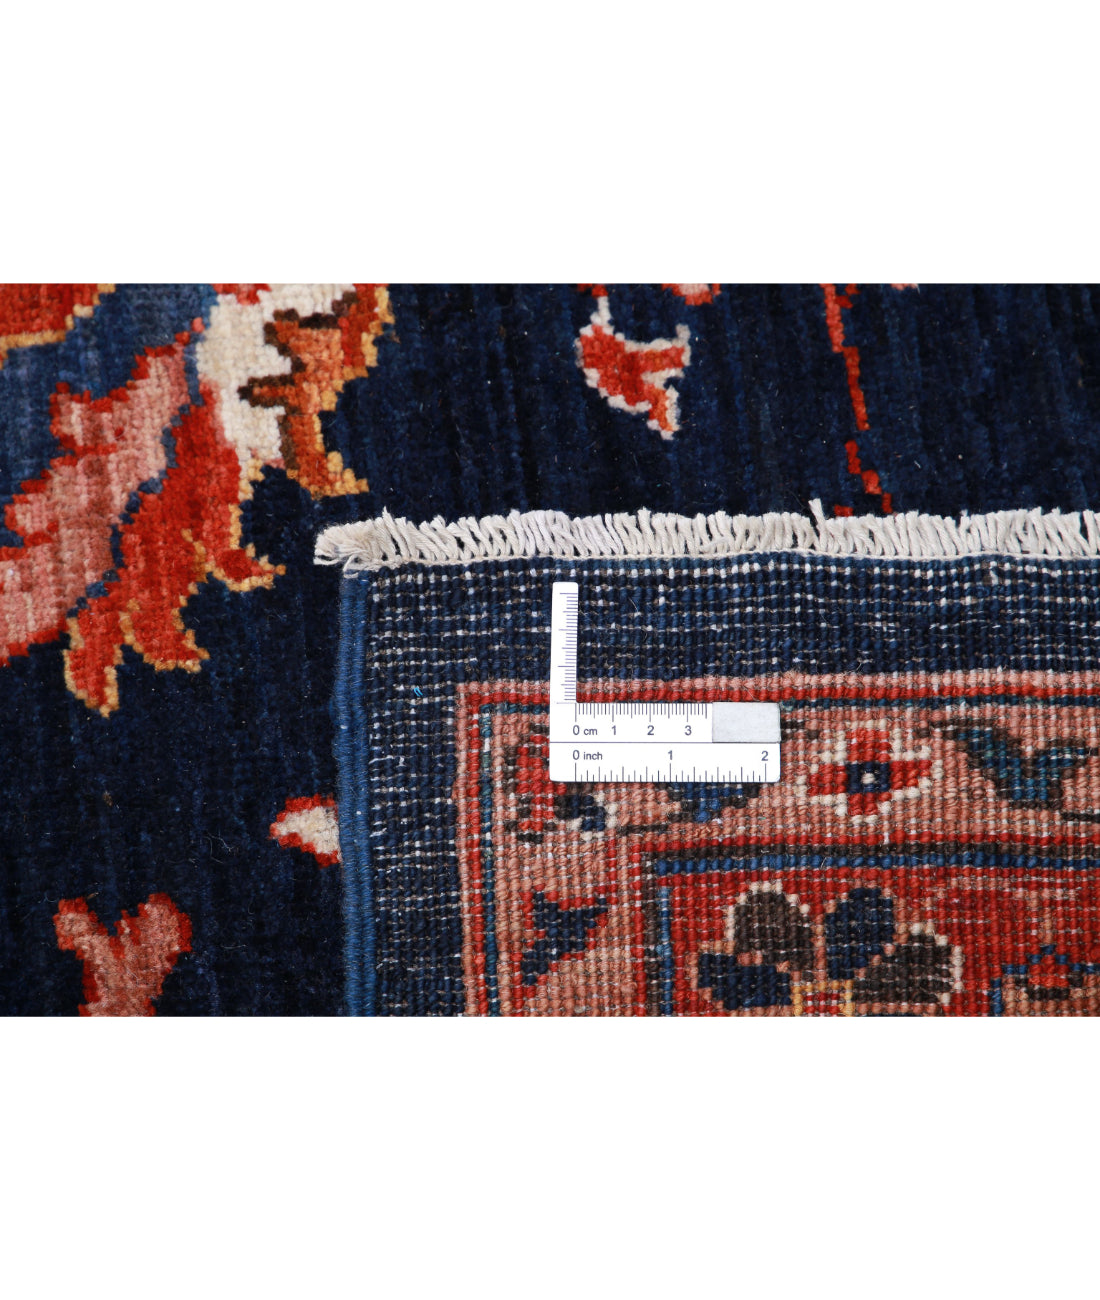 Ziegler 9'11'' X 13'7'' Hand-Knotted Wool Rug 9'11'' x 13'7'' (298 X 408) / Blue / Red